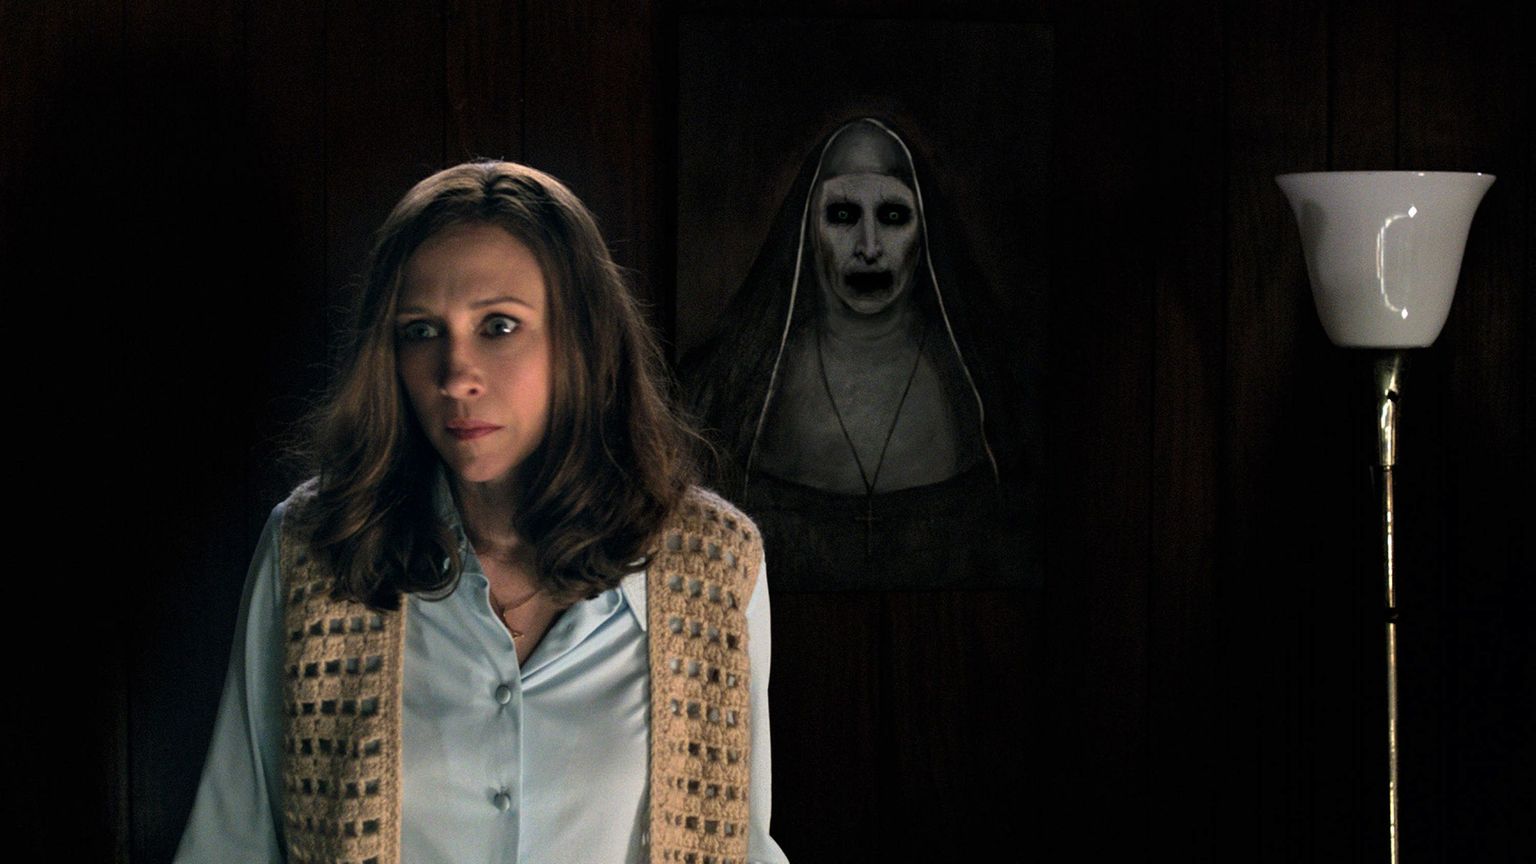 Kaader filmist "The Conjuring"